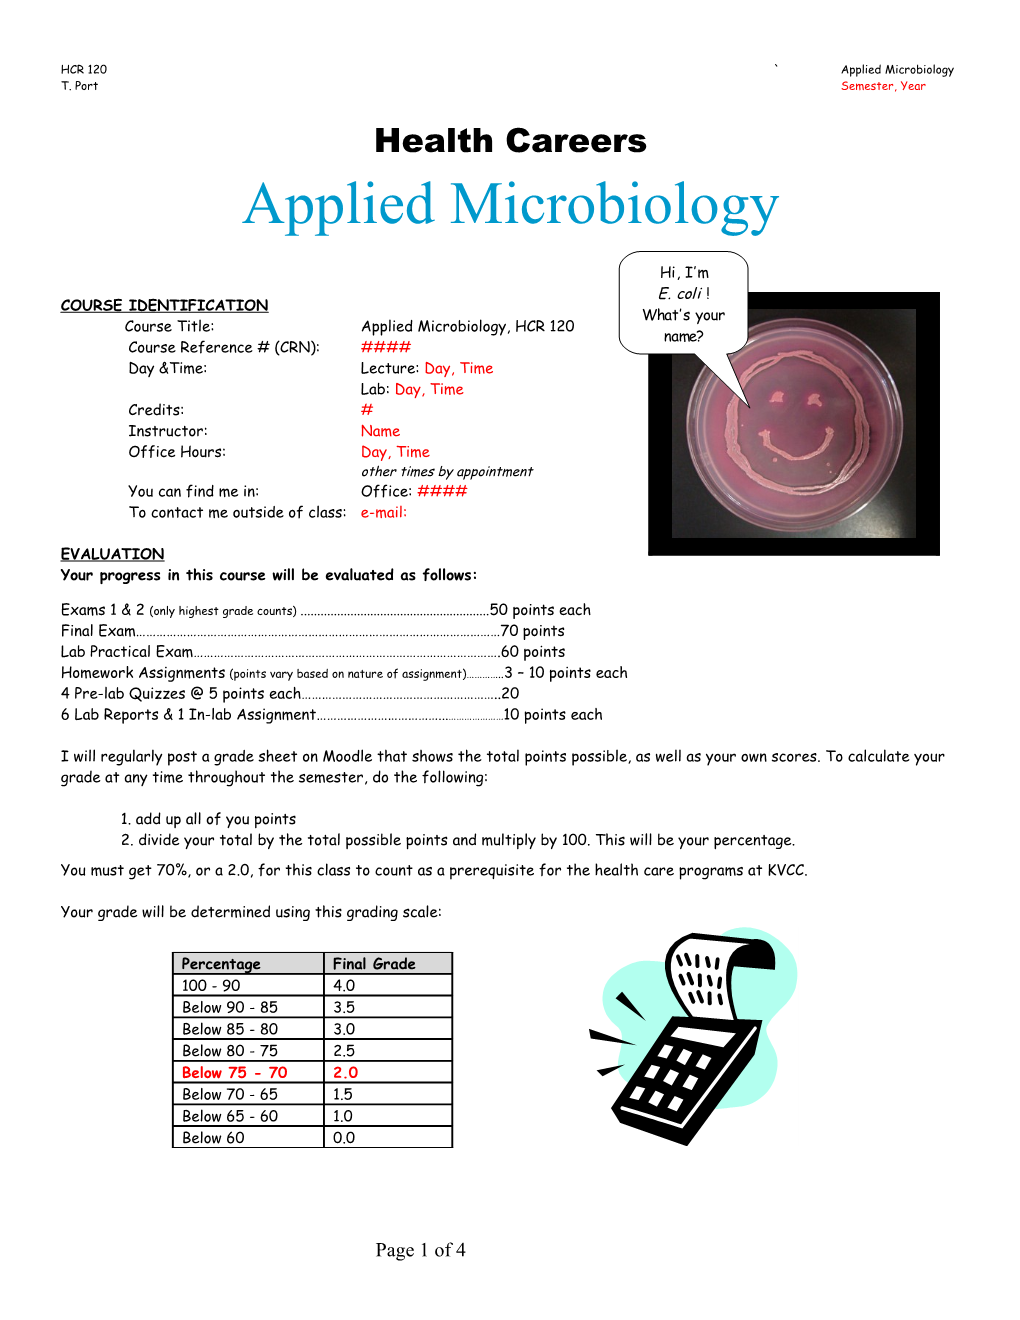 Applied Microbiology College Course Syllabus